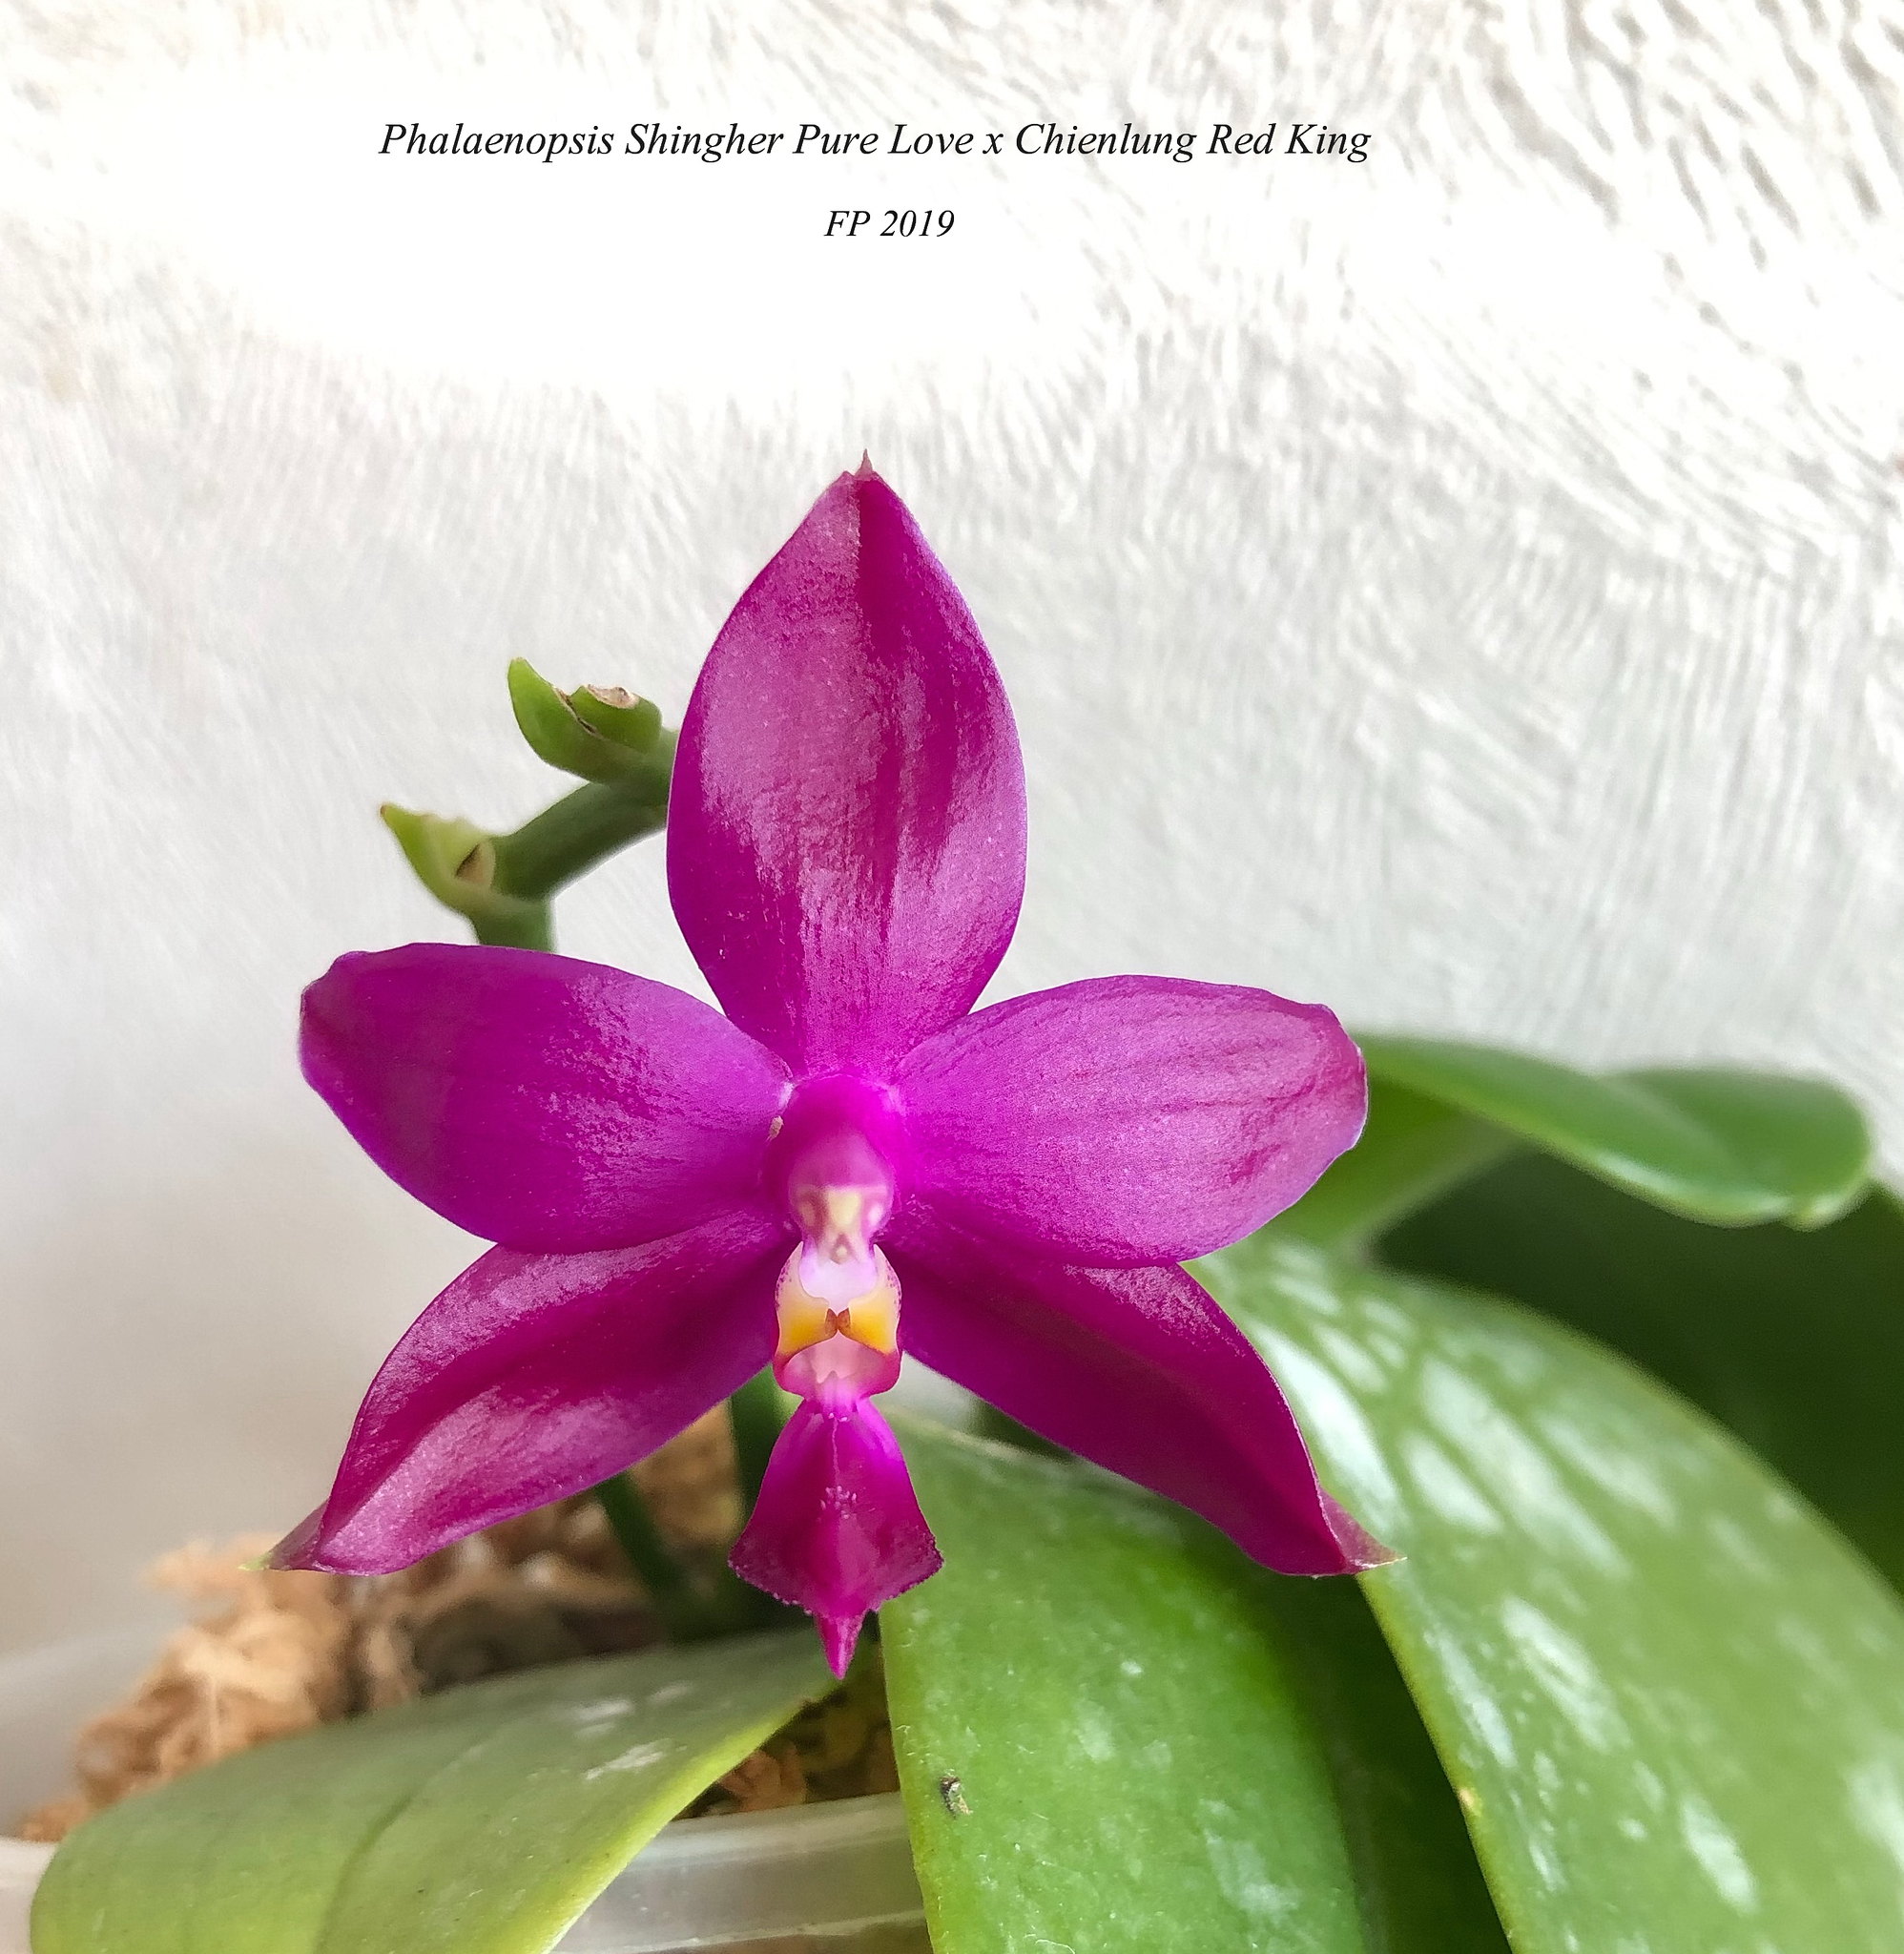 Phalaenopsis Shingher Pure Love x Chienlung Red King 46389837004_e31eb5bb7a_k